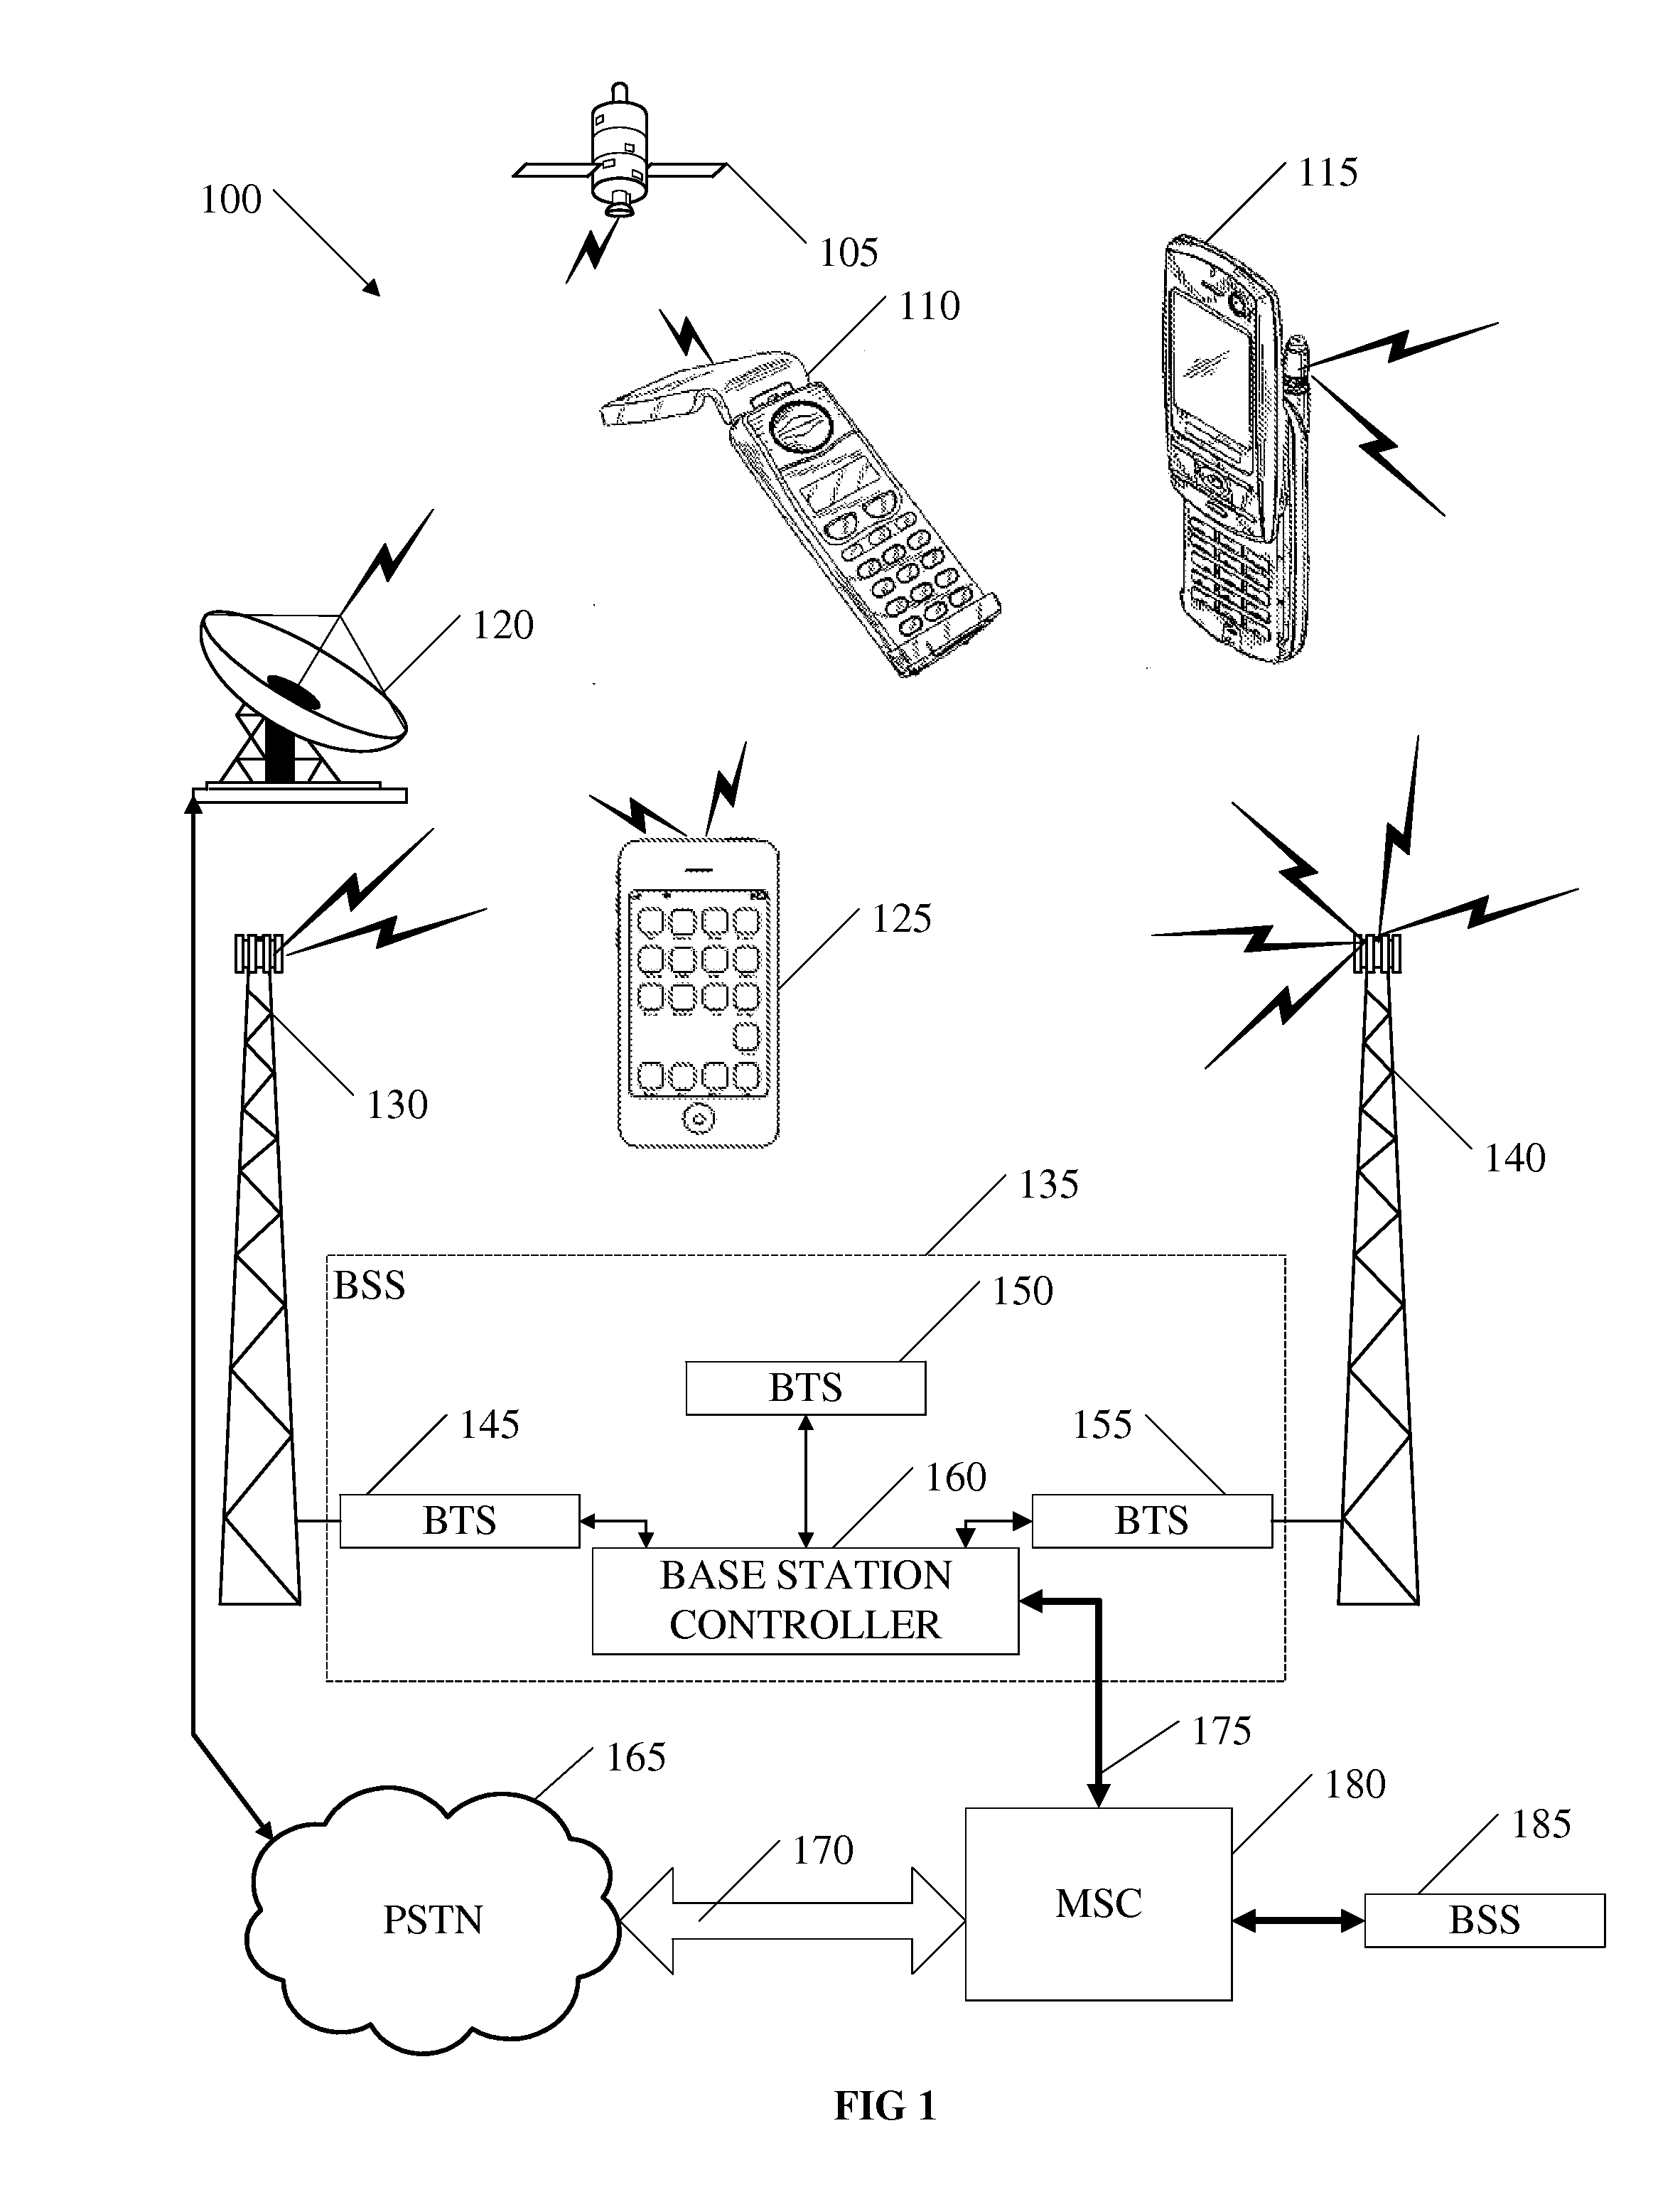 Ambient Information for Usage of Wireless Communication Devices